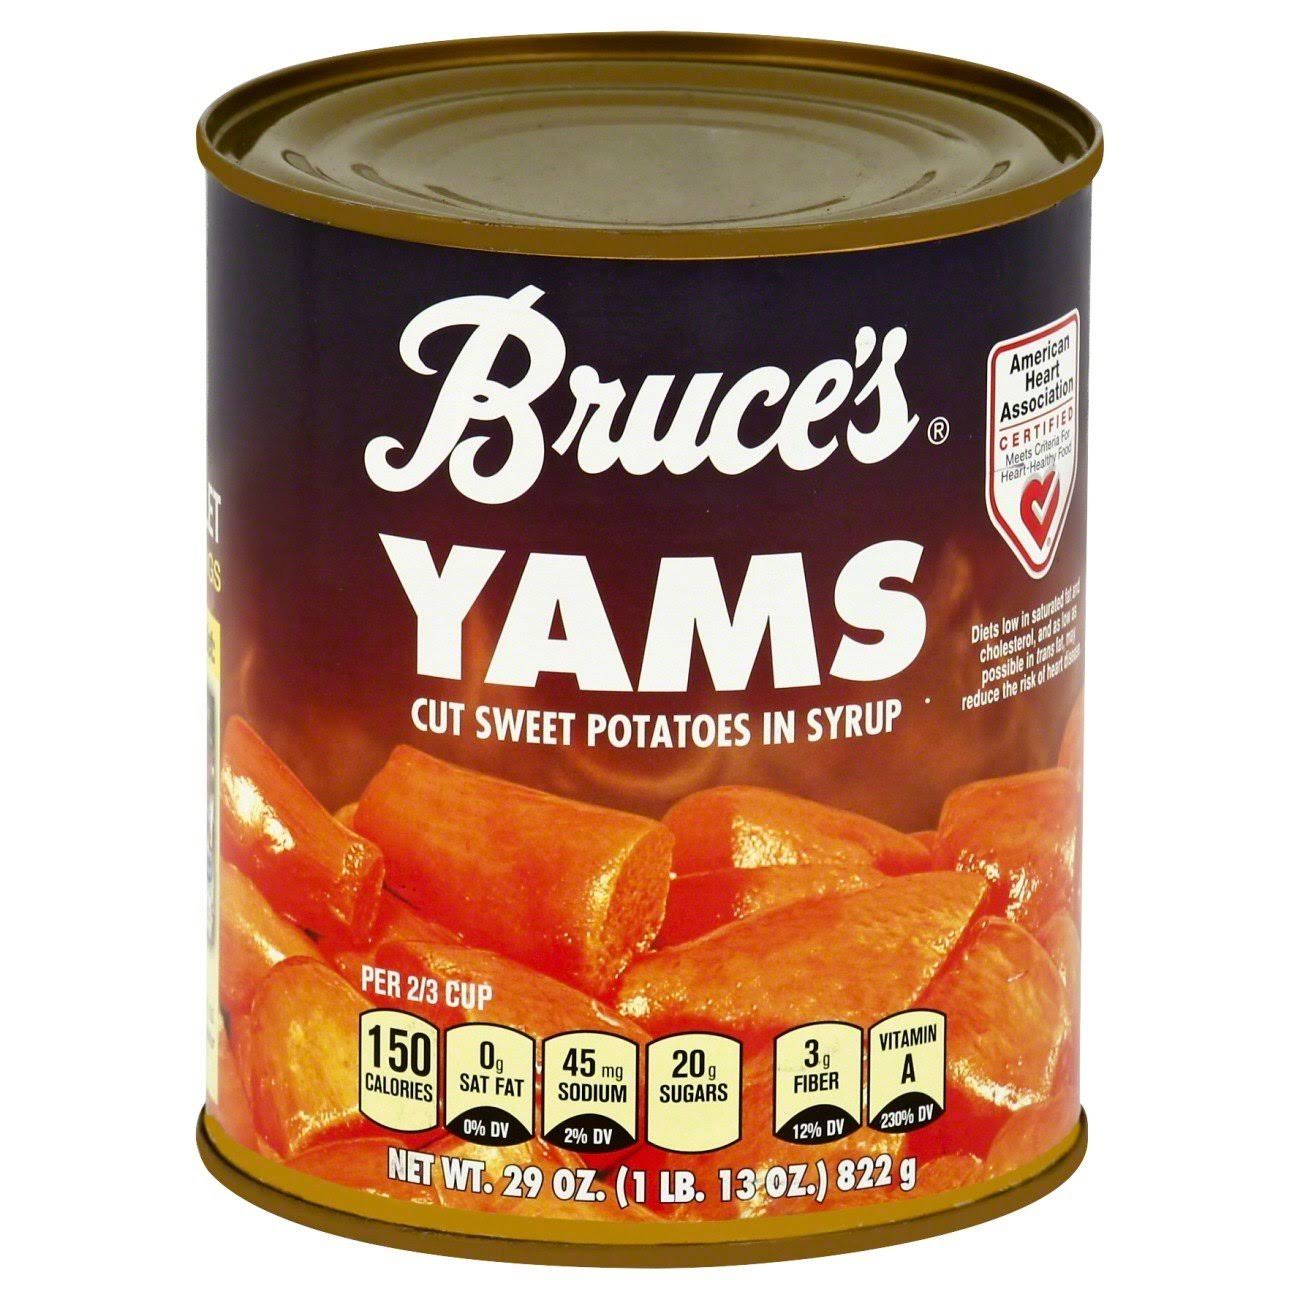 Bruce's Yams Cut Sweet Potatoes In Syrup - 822g